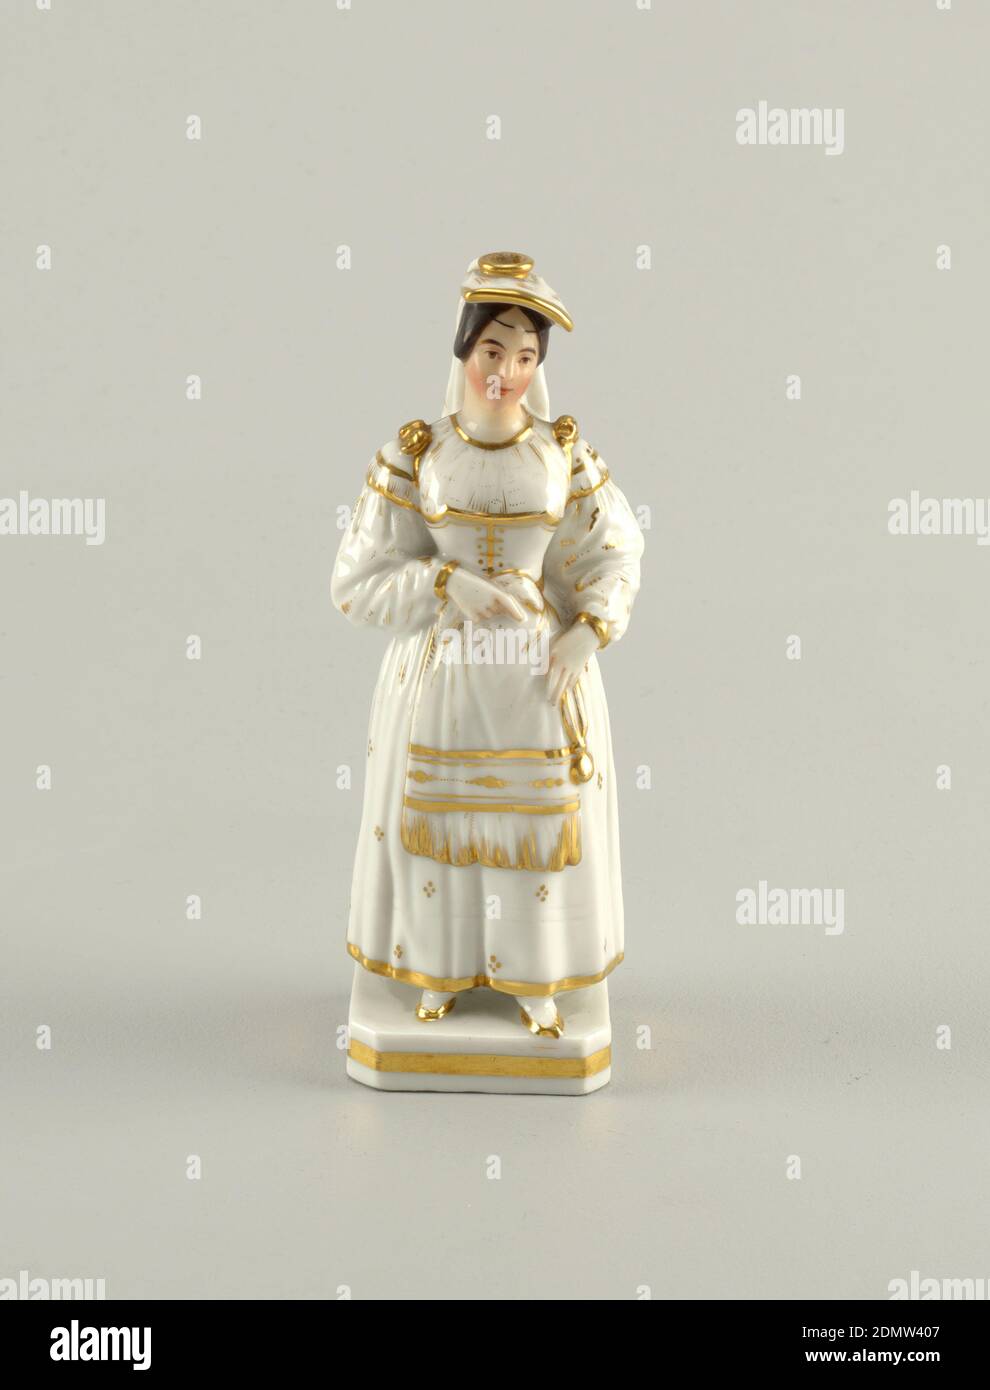 Figures, Glazed and gilt porcelain, A woman dressed in white with gold accents. She wears a fringed apron and carried a gold watch (?), 19th century, ceramics, Decorative Arts, Figures Stock Photo